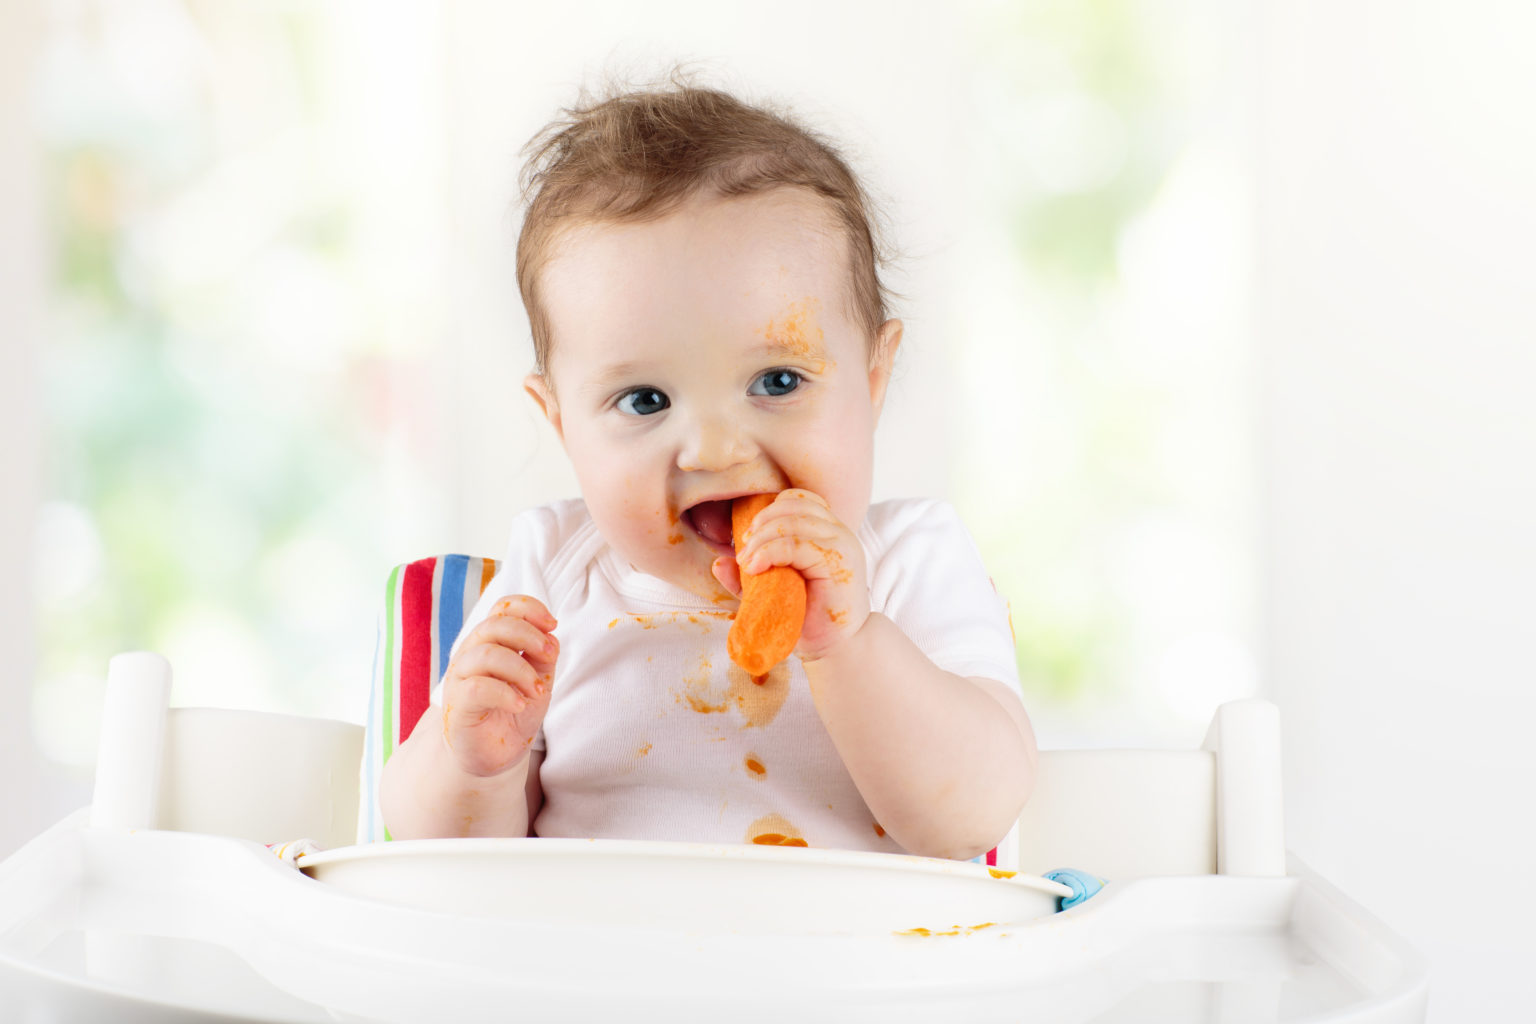 A Parent's Guide to Choking Hazards and Safe Baby Feeding